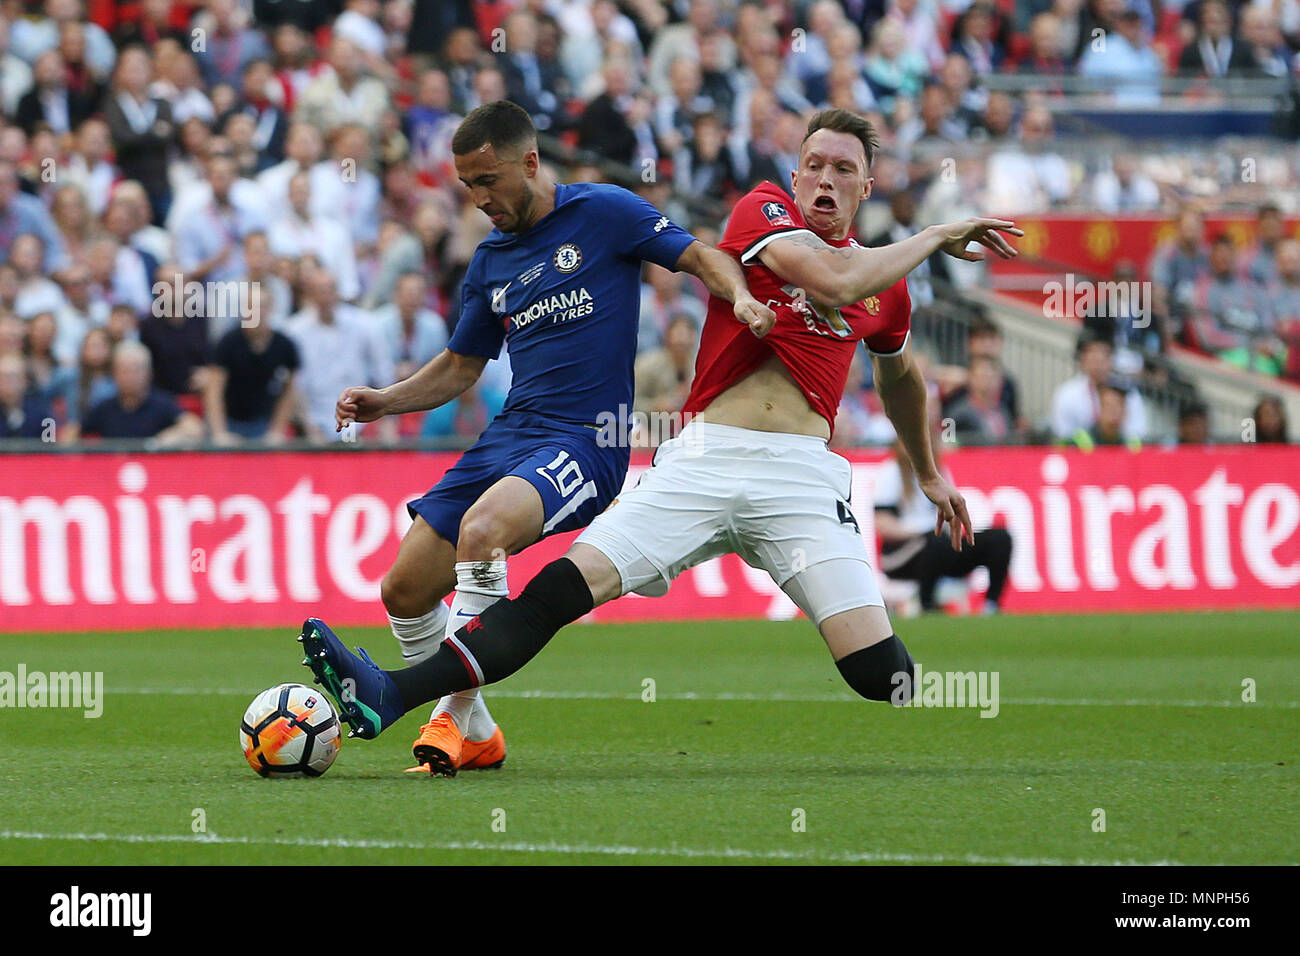 London, UK, 19 May 2018.   Eden Hazard of Chelsea is fouled by Phil Jones of Manchester United and wins a penalty during the FA Cup Final match between Chelsea and Manchester United at Wembley Stadium on May 19th 2018 in London, England. (Photo by Paul Chesterton/phcimages.com) Credit: PHC Images/Alamy Live News Credit: PHC Images/Alamy Live News Stock Photo